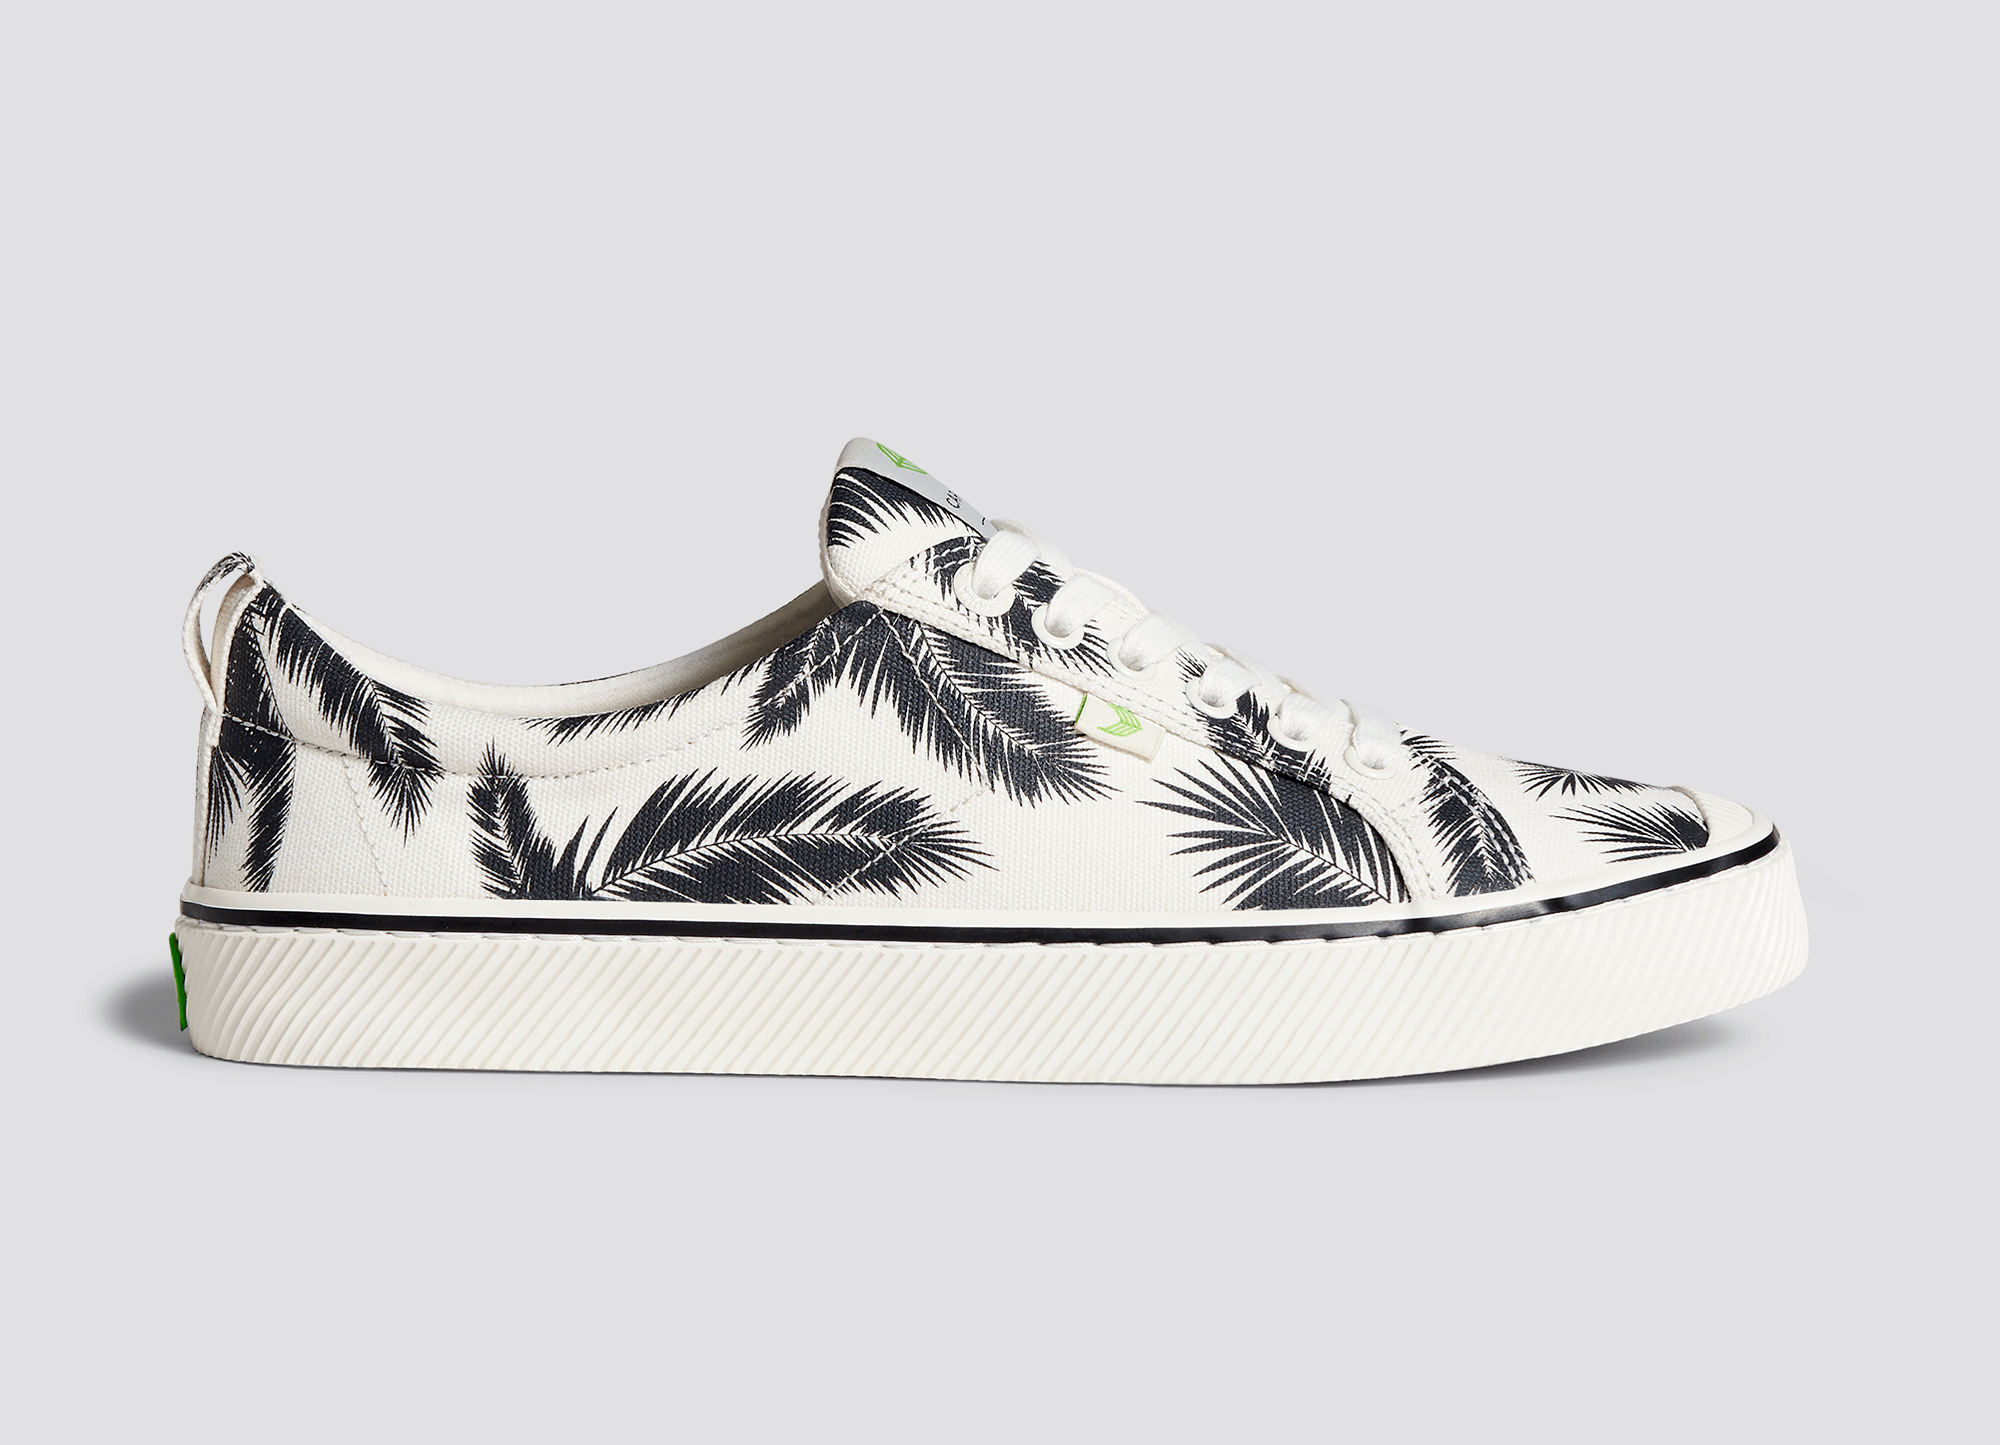 Women's Off-White Palm Trees Canvas Sneakers | OCA Low Women / Off-White Palm Trees / 5.5 by Cariuma